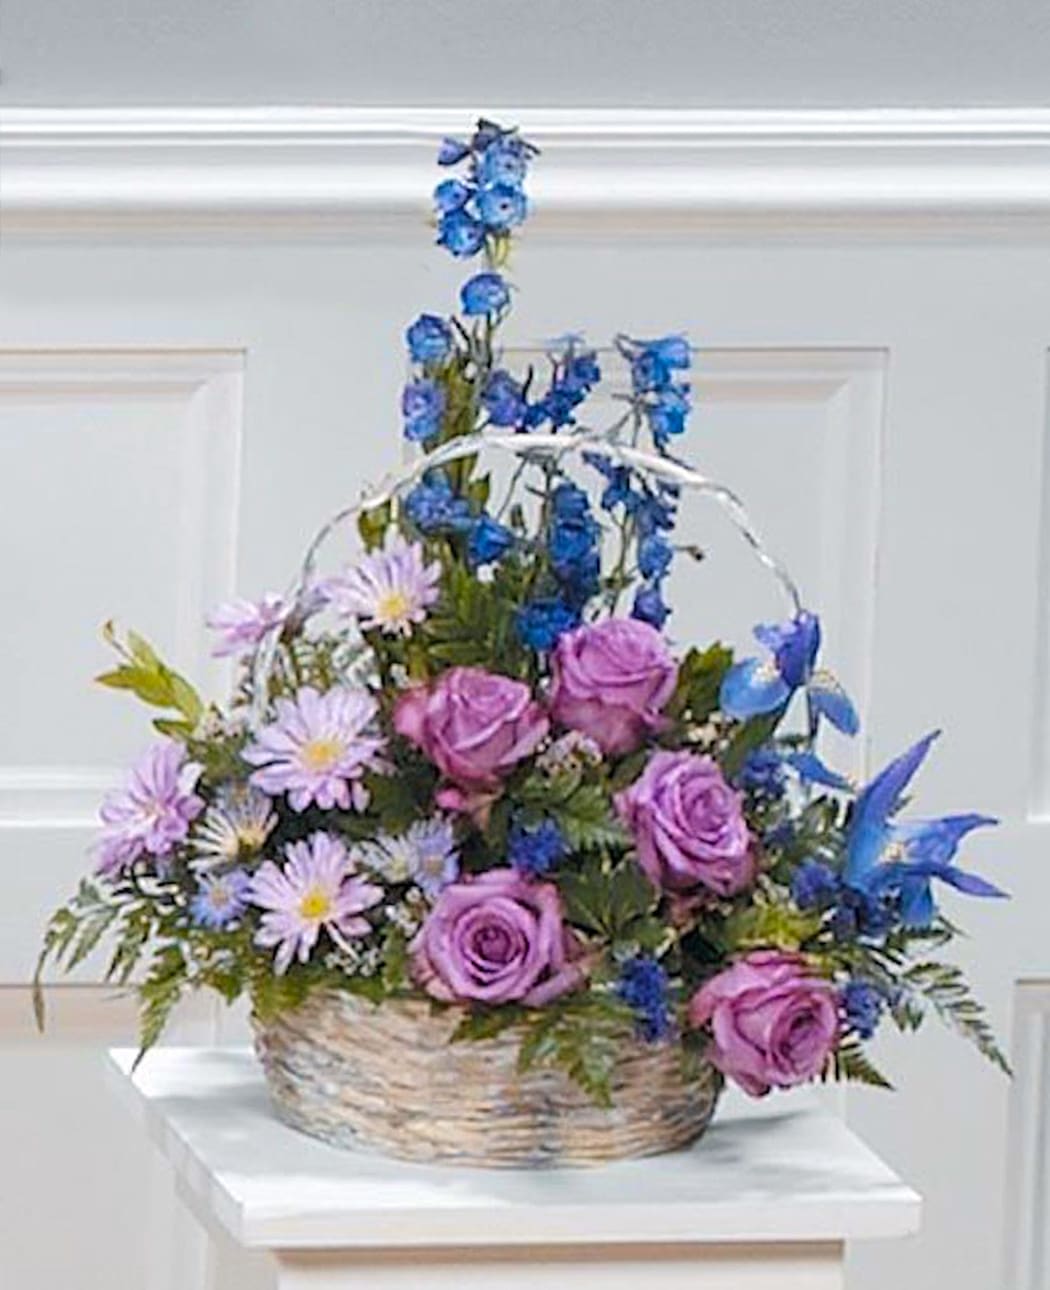 Serene Sentiment - A whitewash field basket holds a gathering of serene Lavendar Roses, Iris, Delphinium, Daisy Pompons and other select florals and greenery.